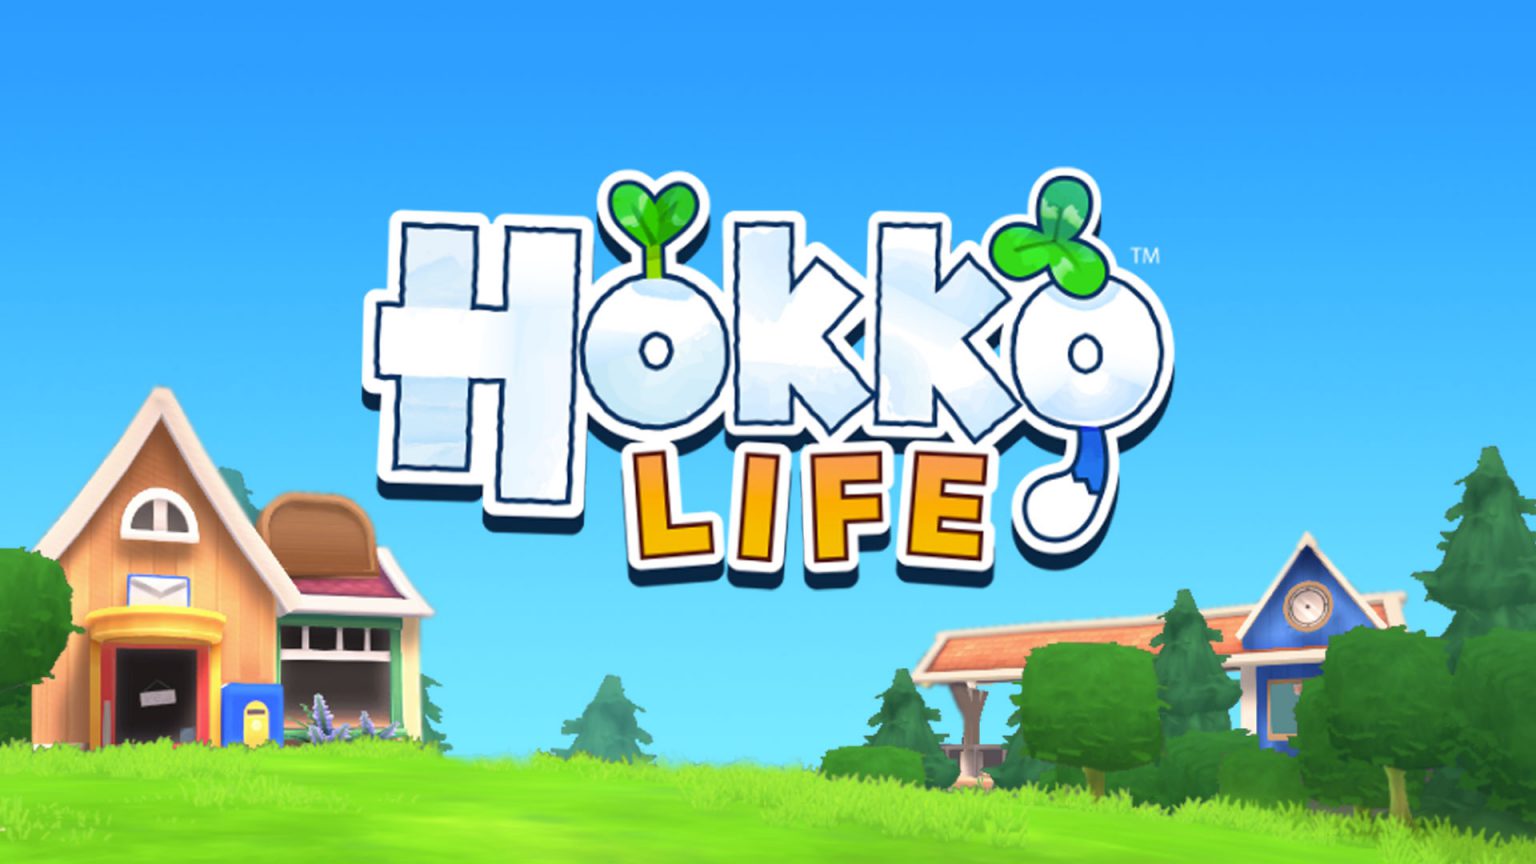 download hokko life switch for free